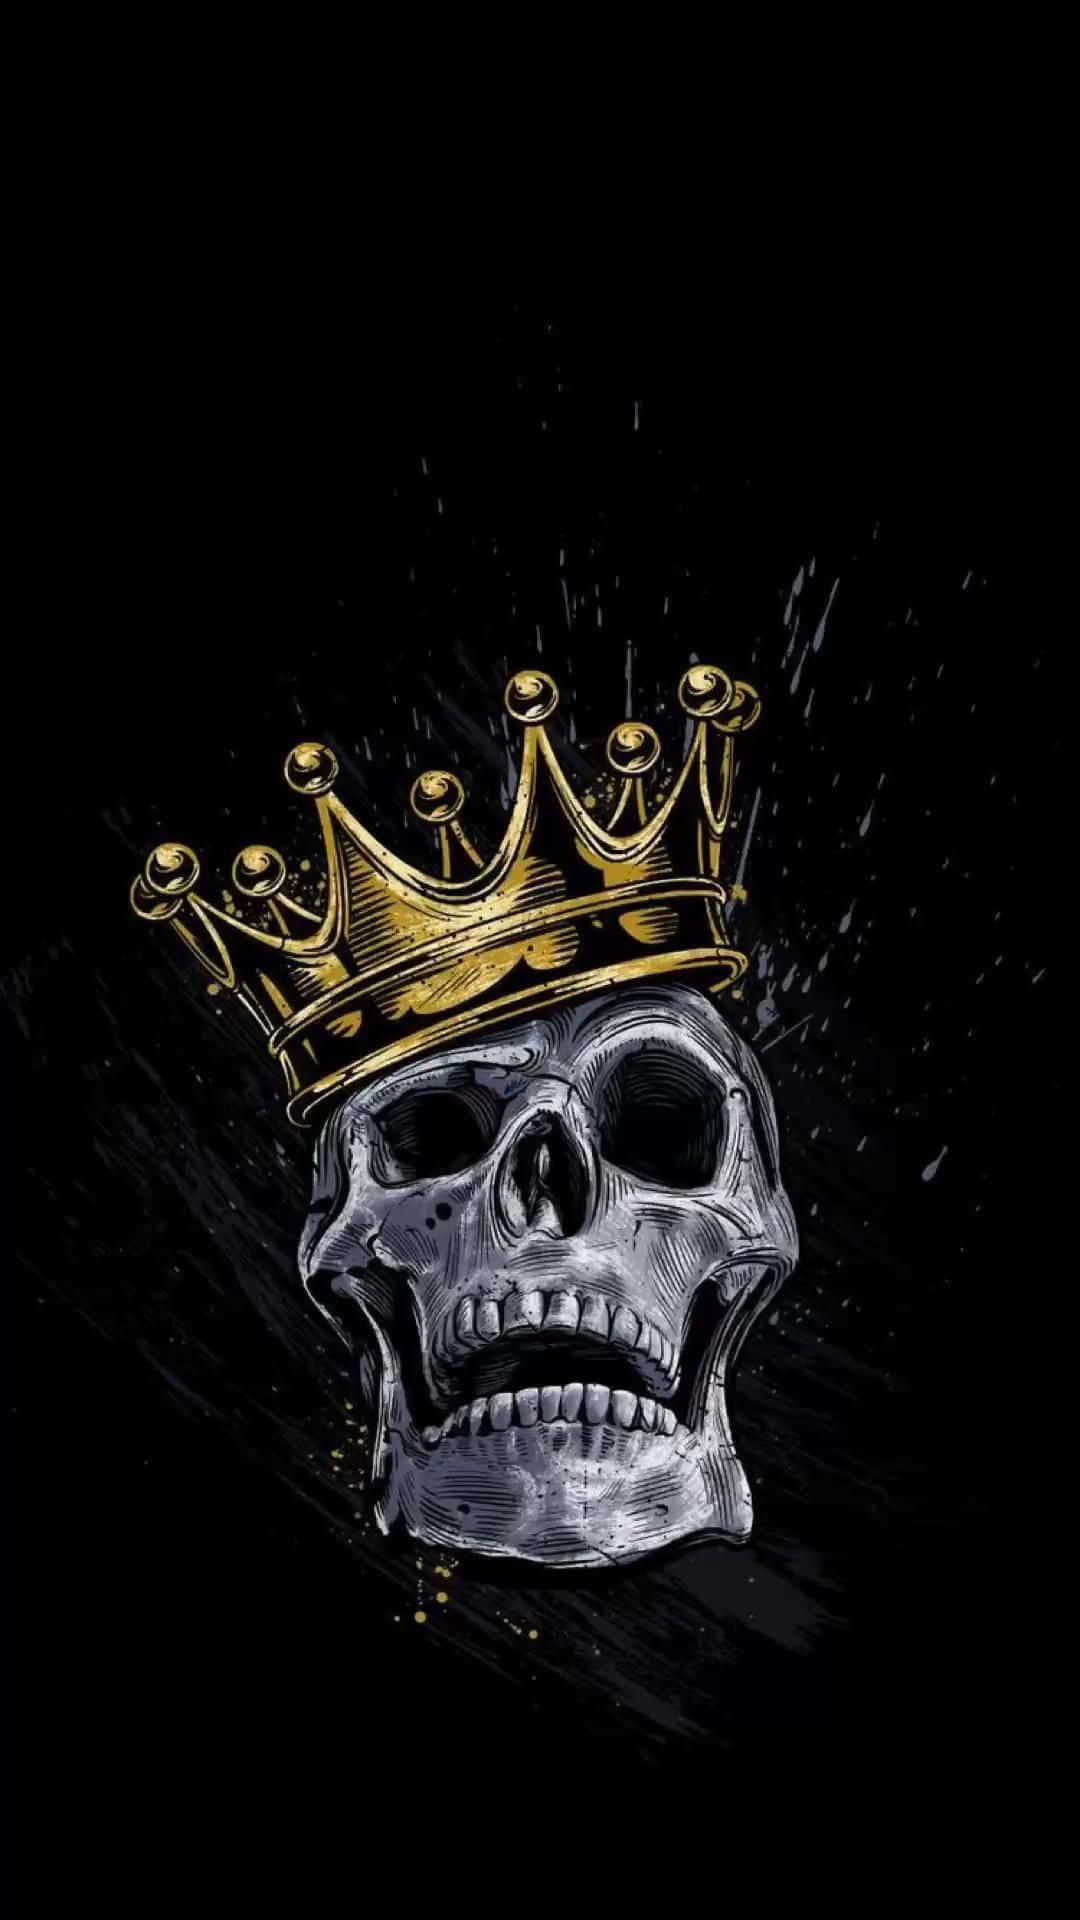 Skull And Crossbones With Crown